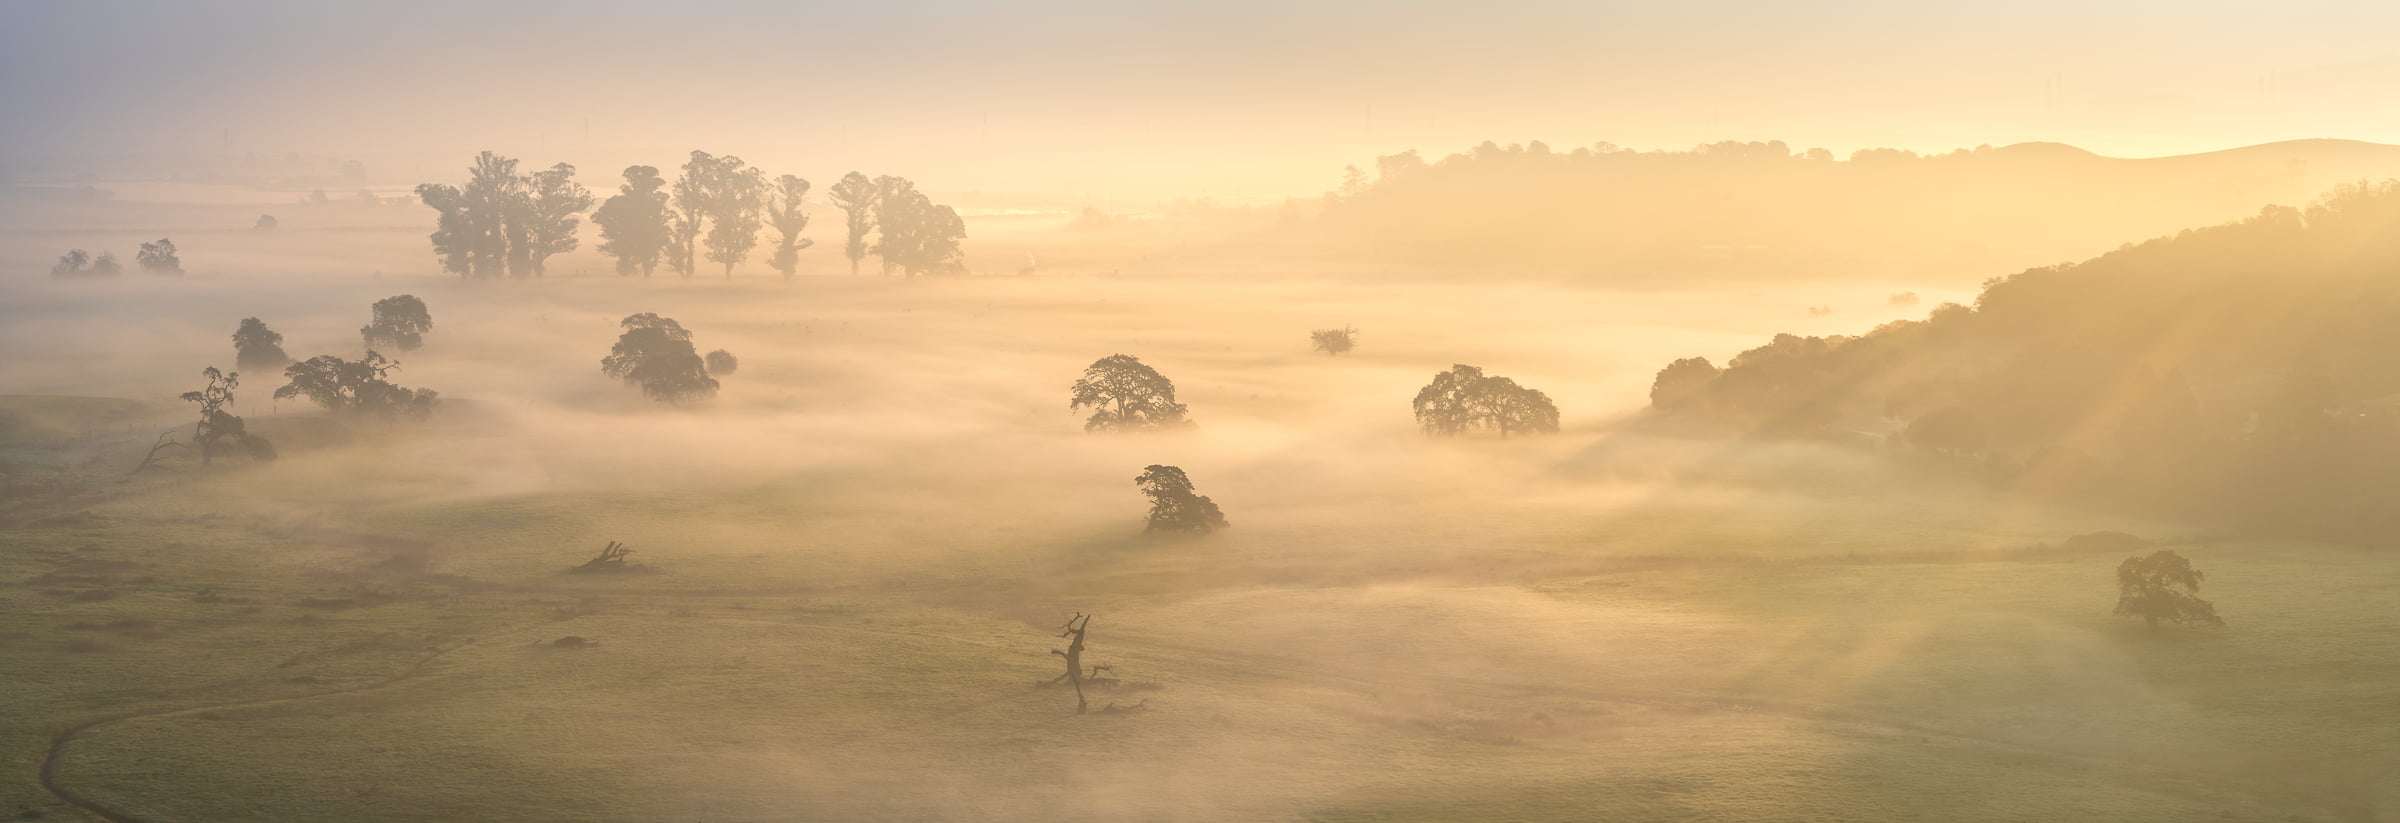 263 megapixels! A very high resolution, large-format VAST photo print of a peaceful morning landscape with a grass field, trees, light fog, and sun rays; landscape photograph created by Jeff Lewis in Northern California.